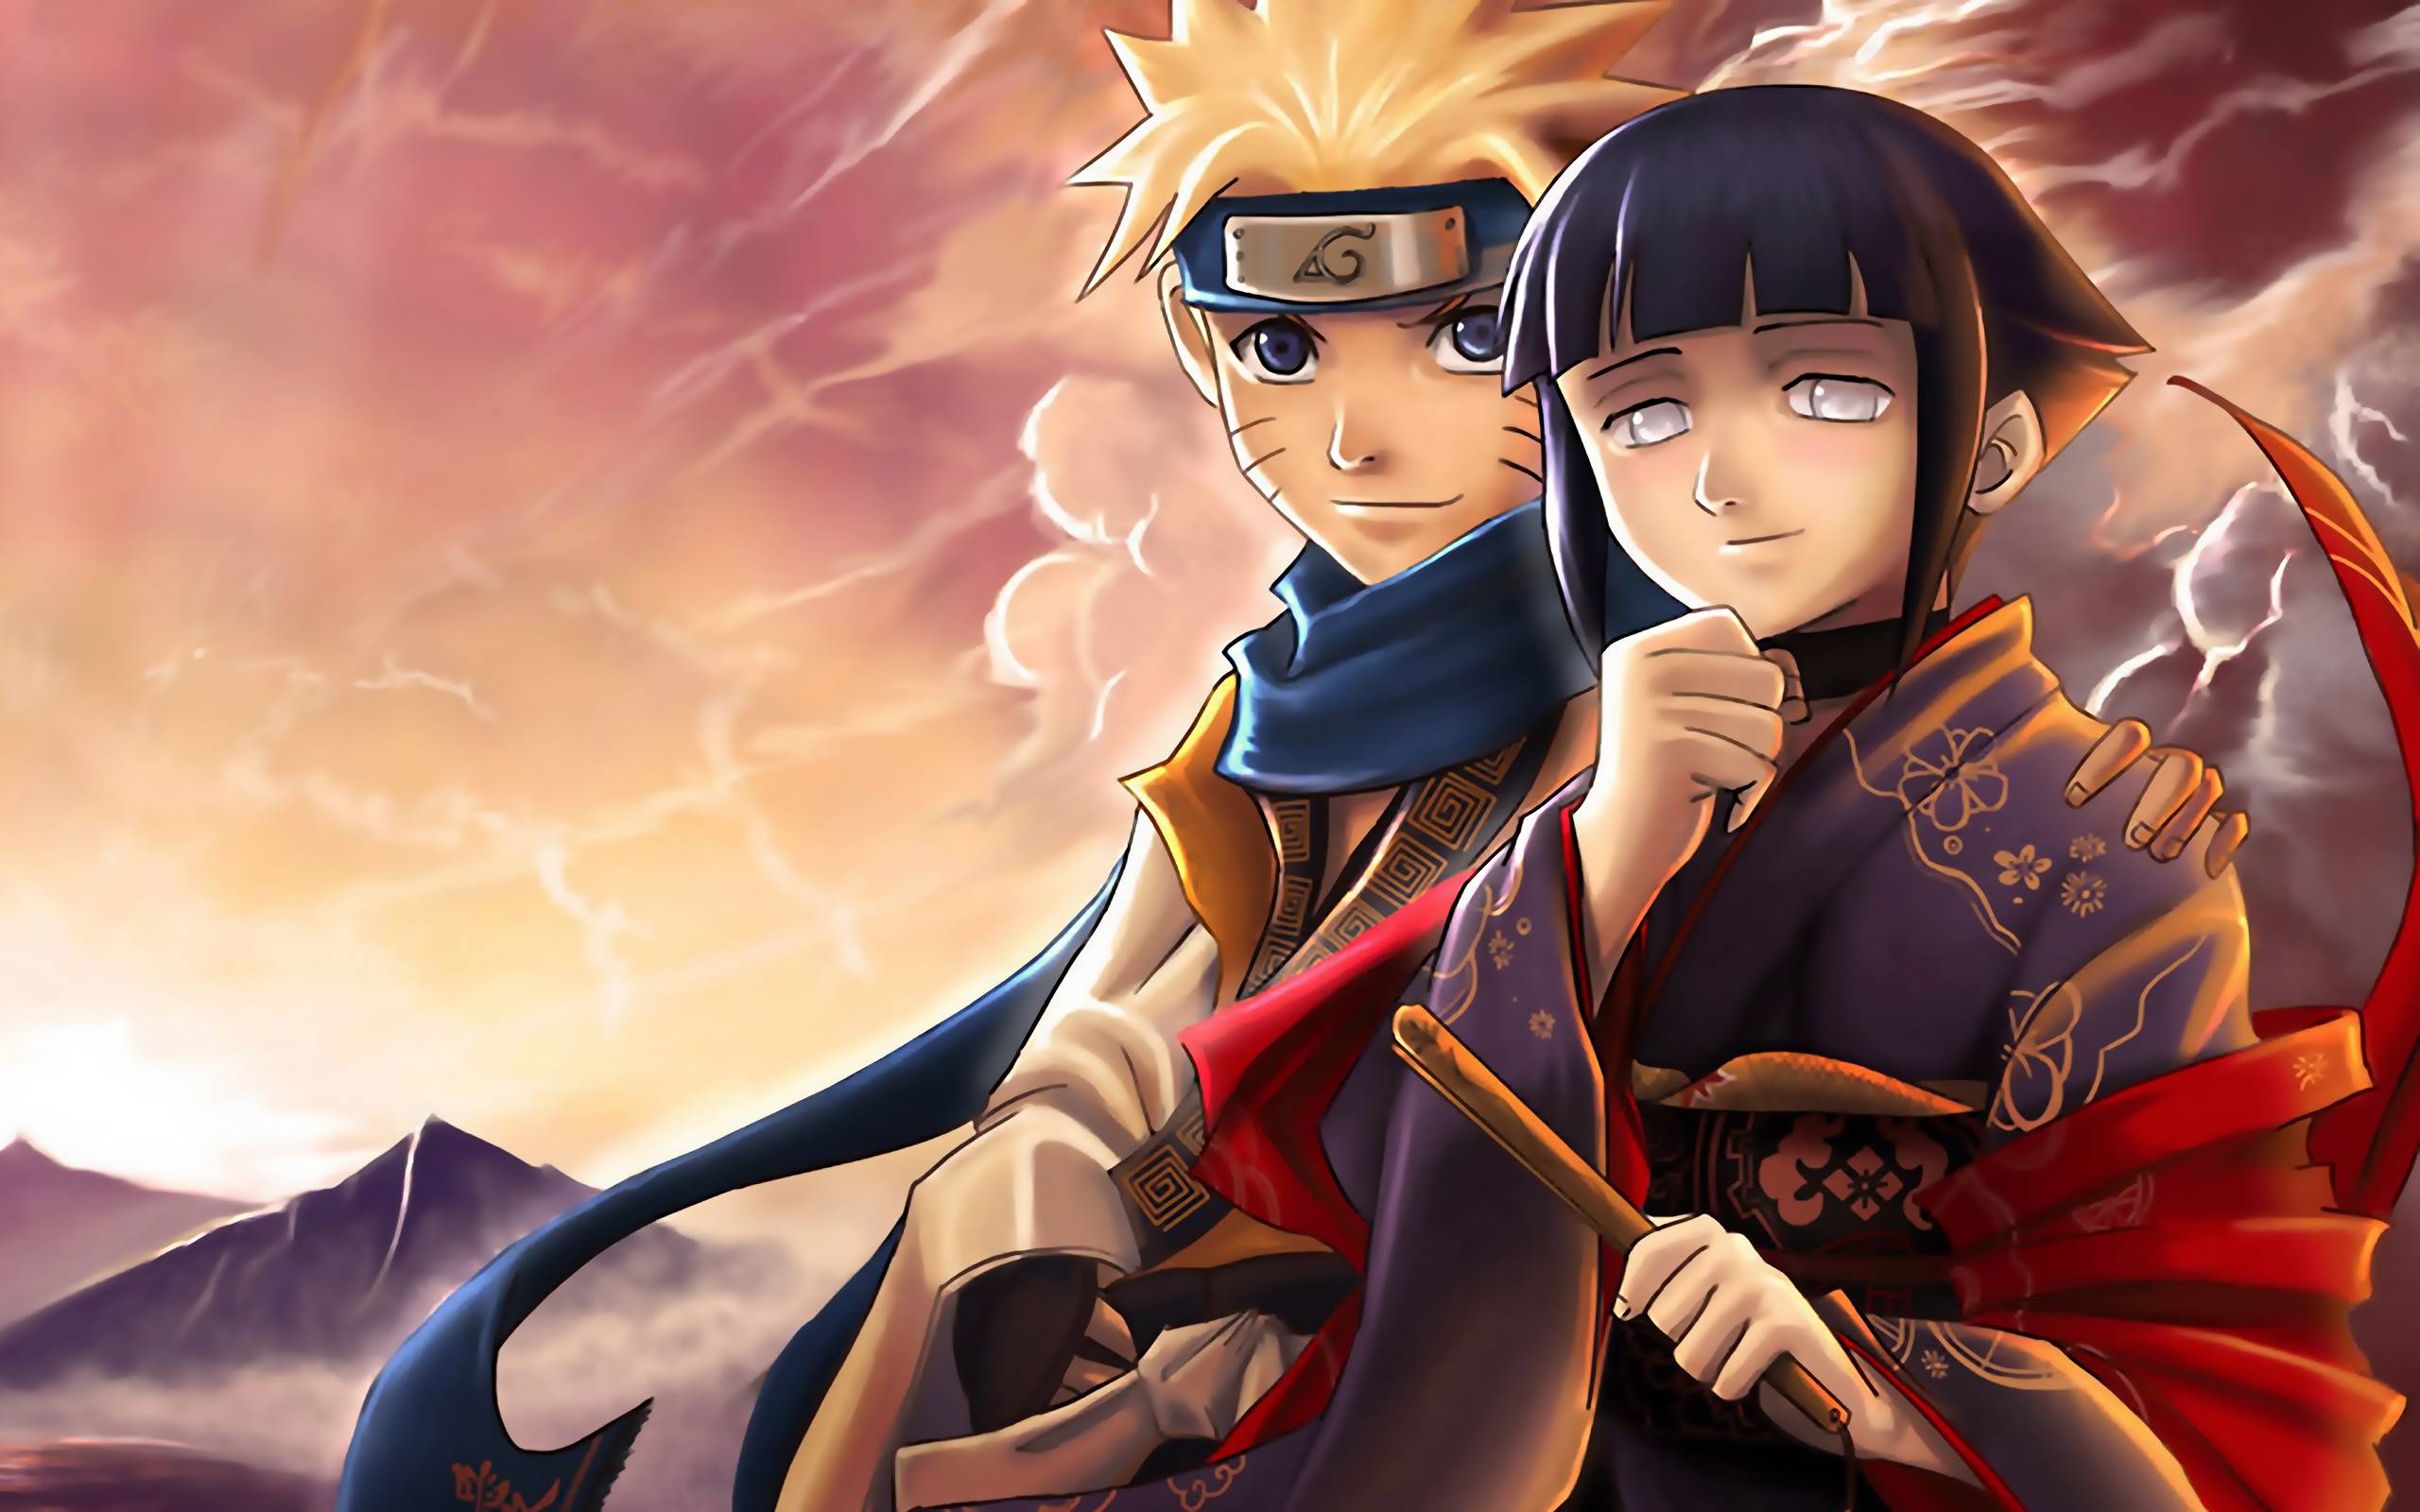 cool wallpapers images photos download Cool Naruto 2560x1600